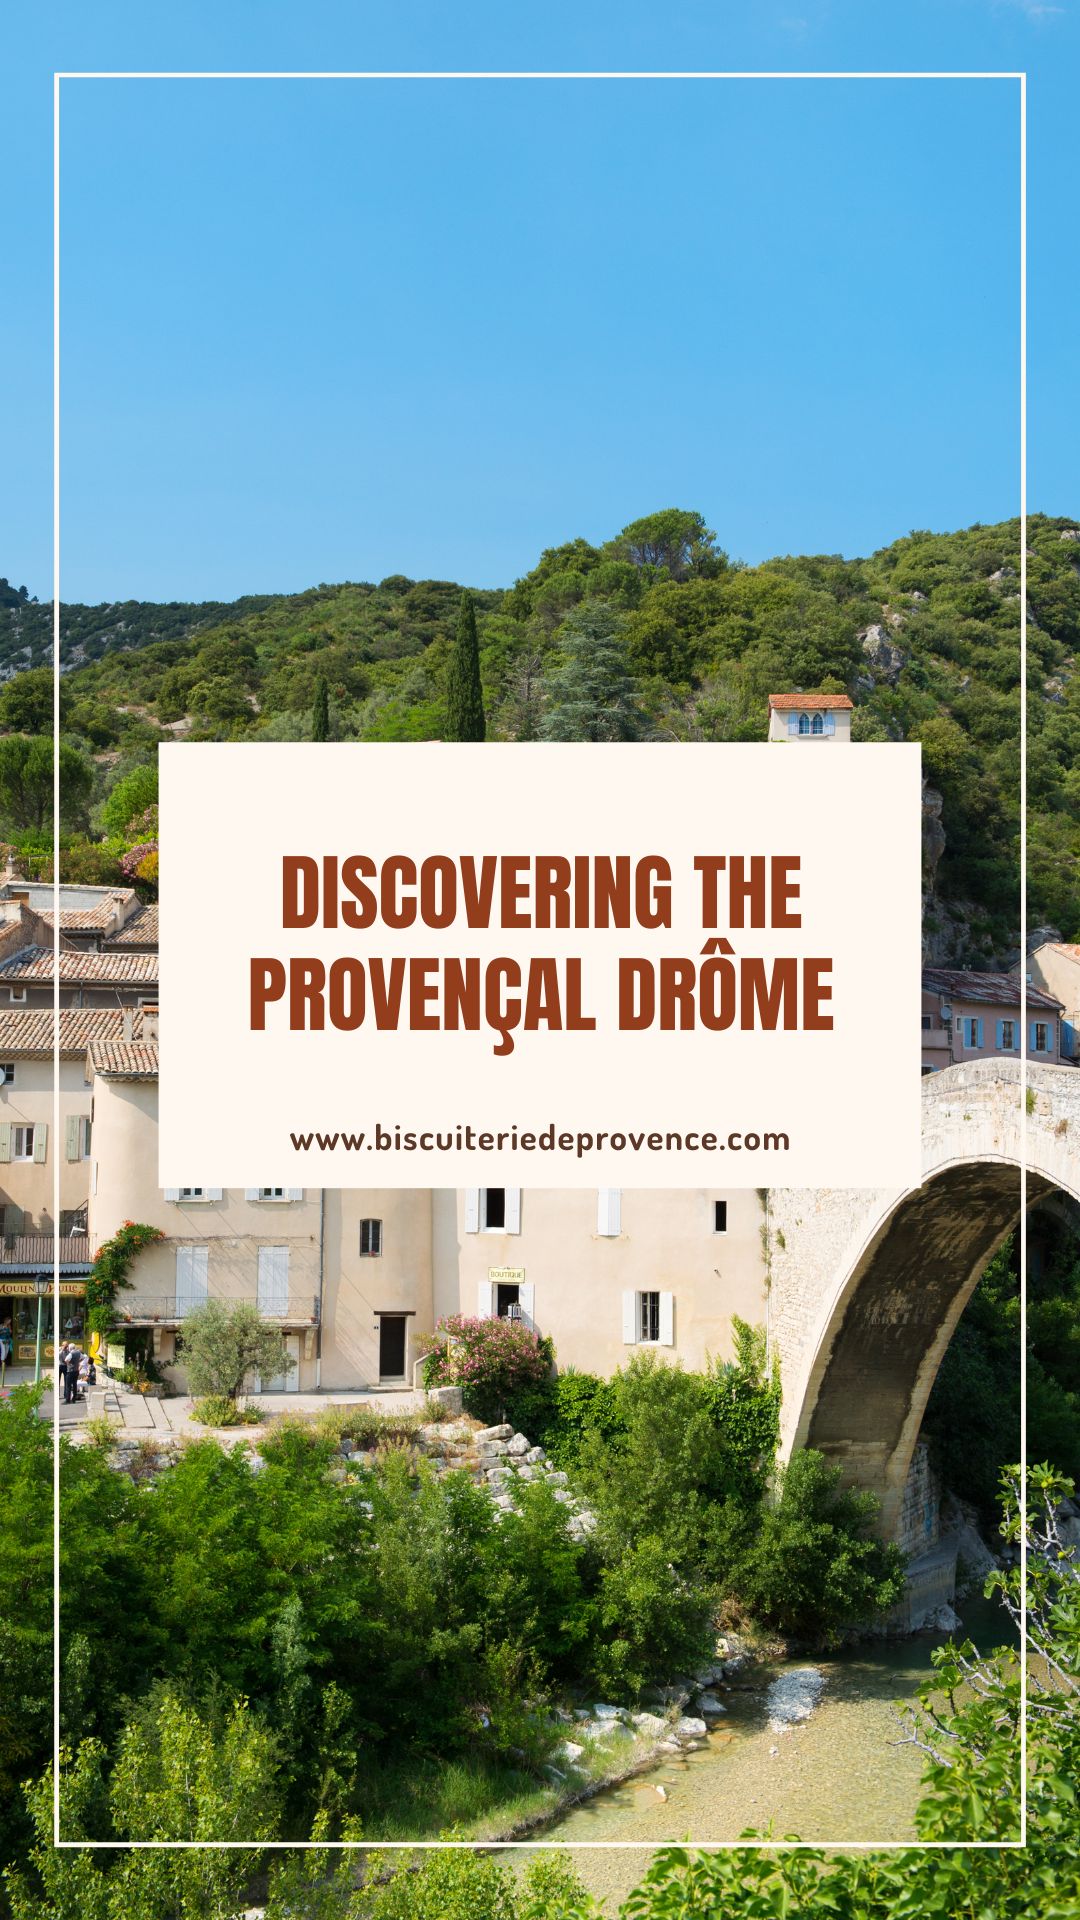 Discovering the provencal drome